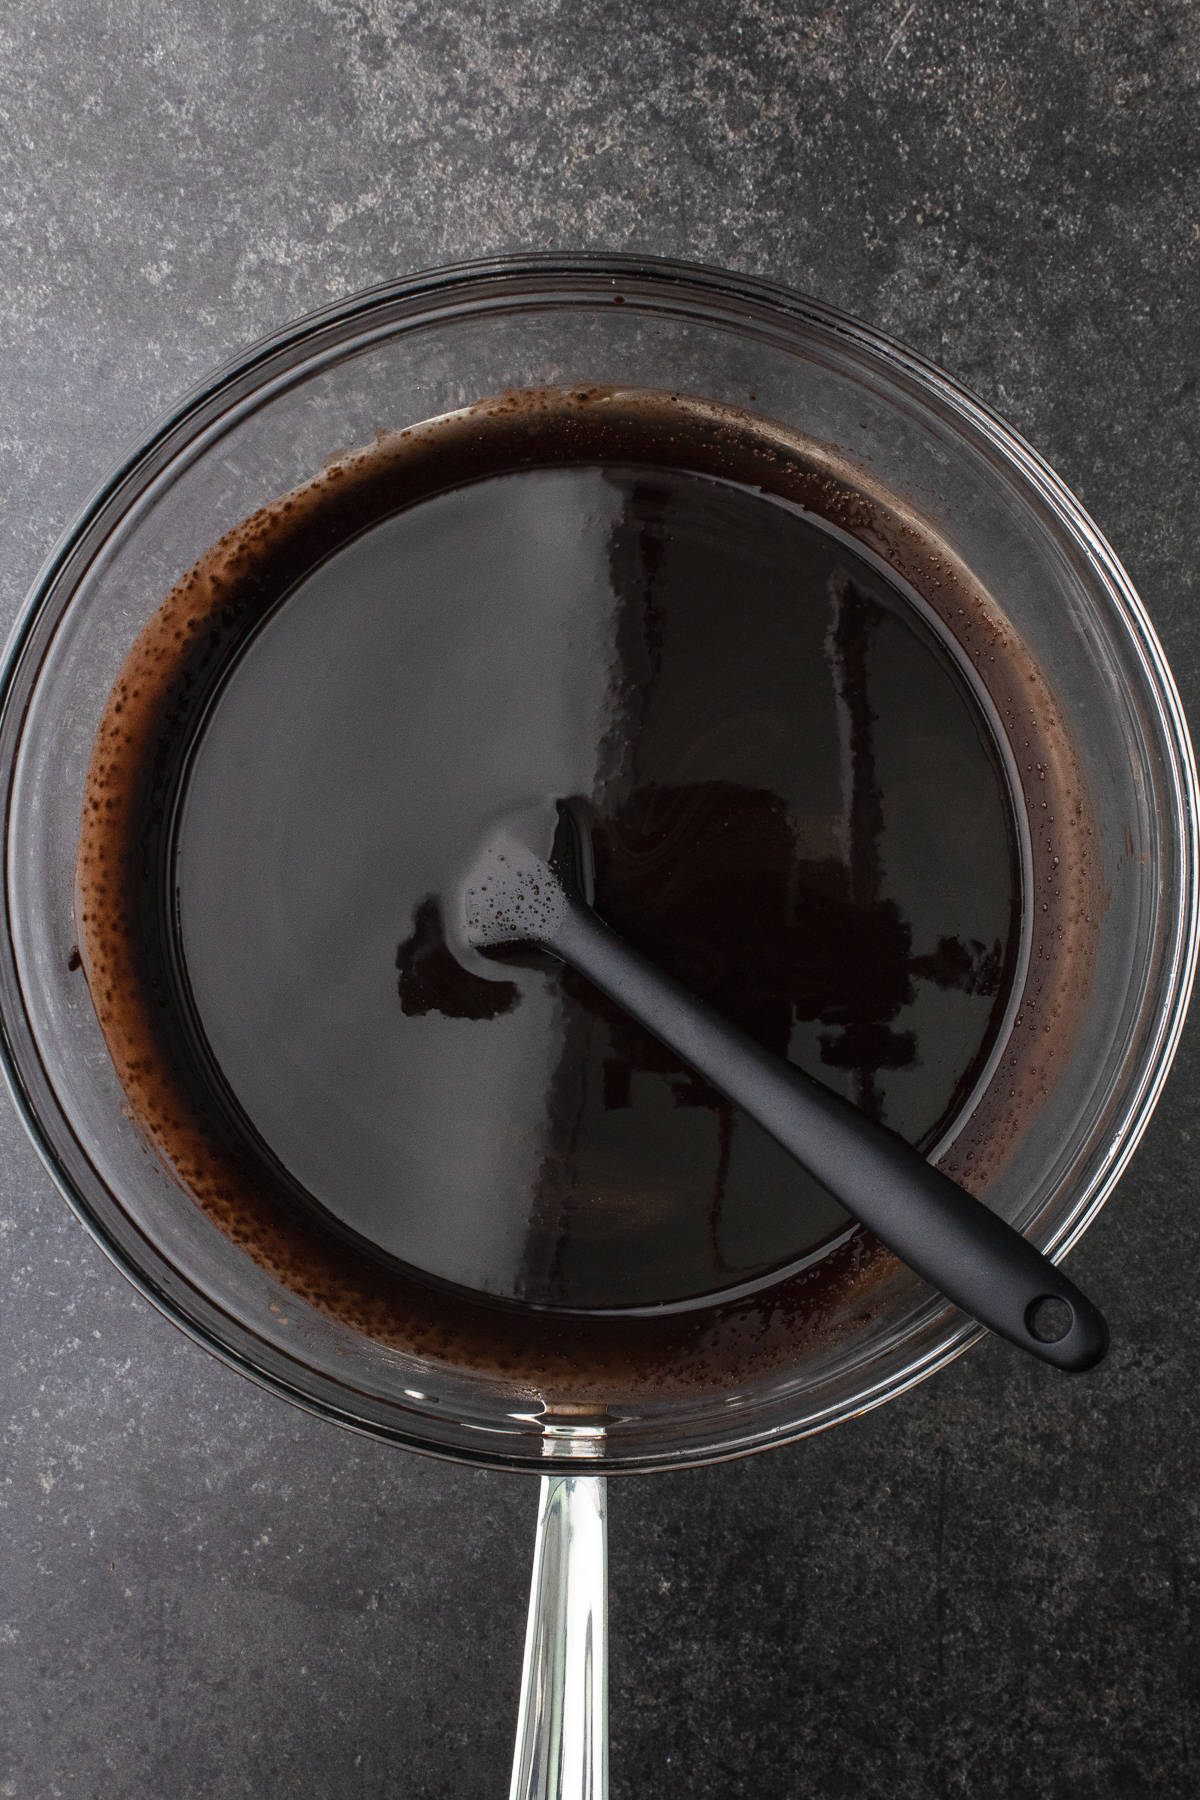 Melted chocolate, cocoa powder, espresso powder and olive oil in a glass bowl over a saucepan of simmering water